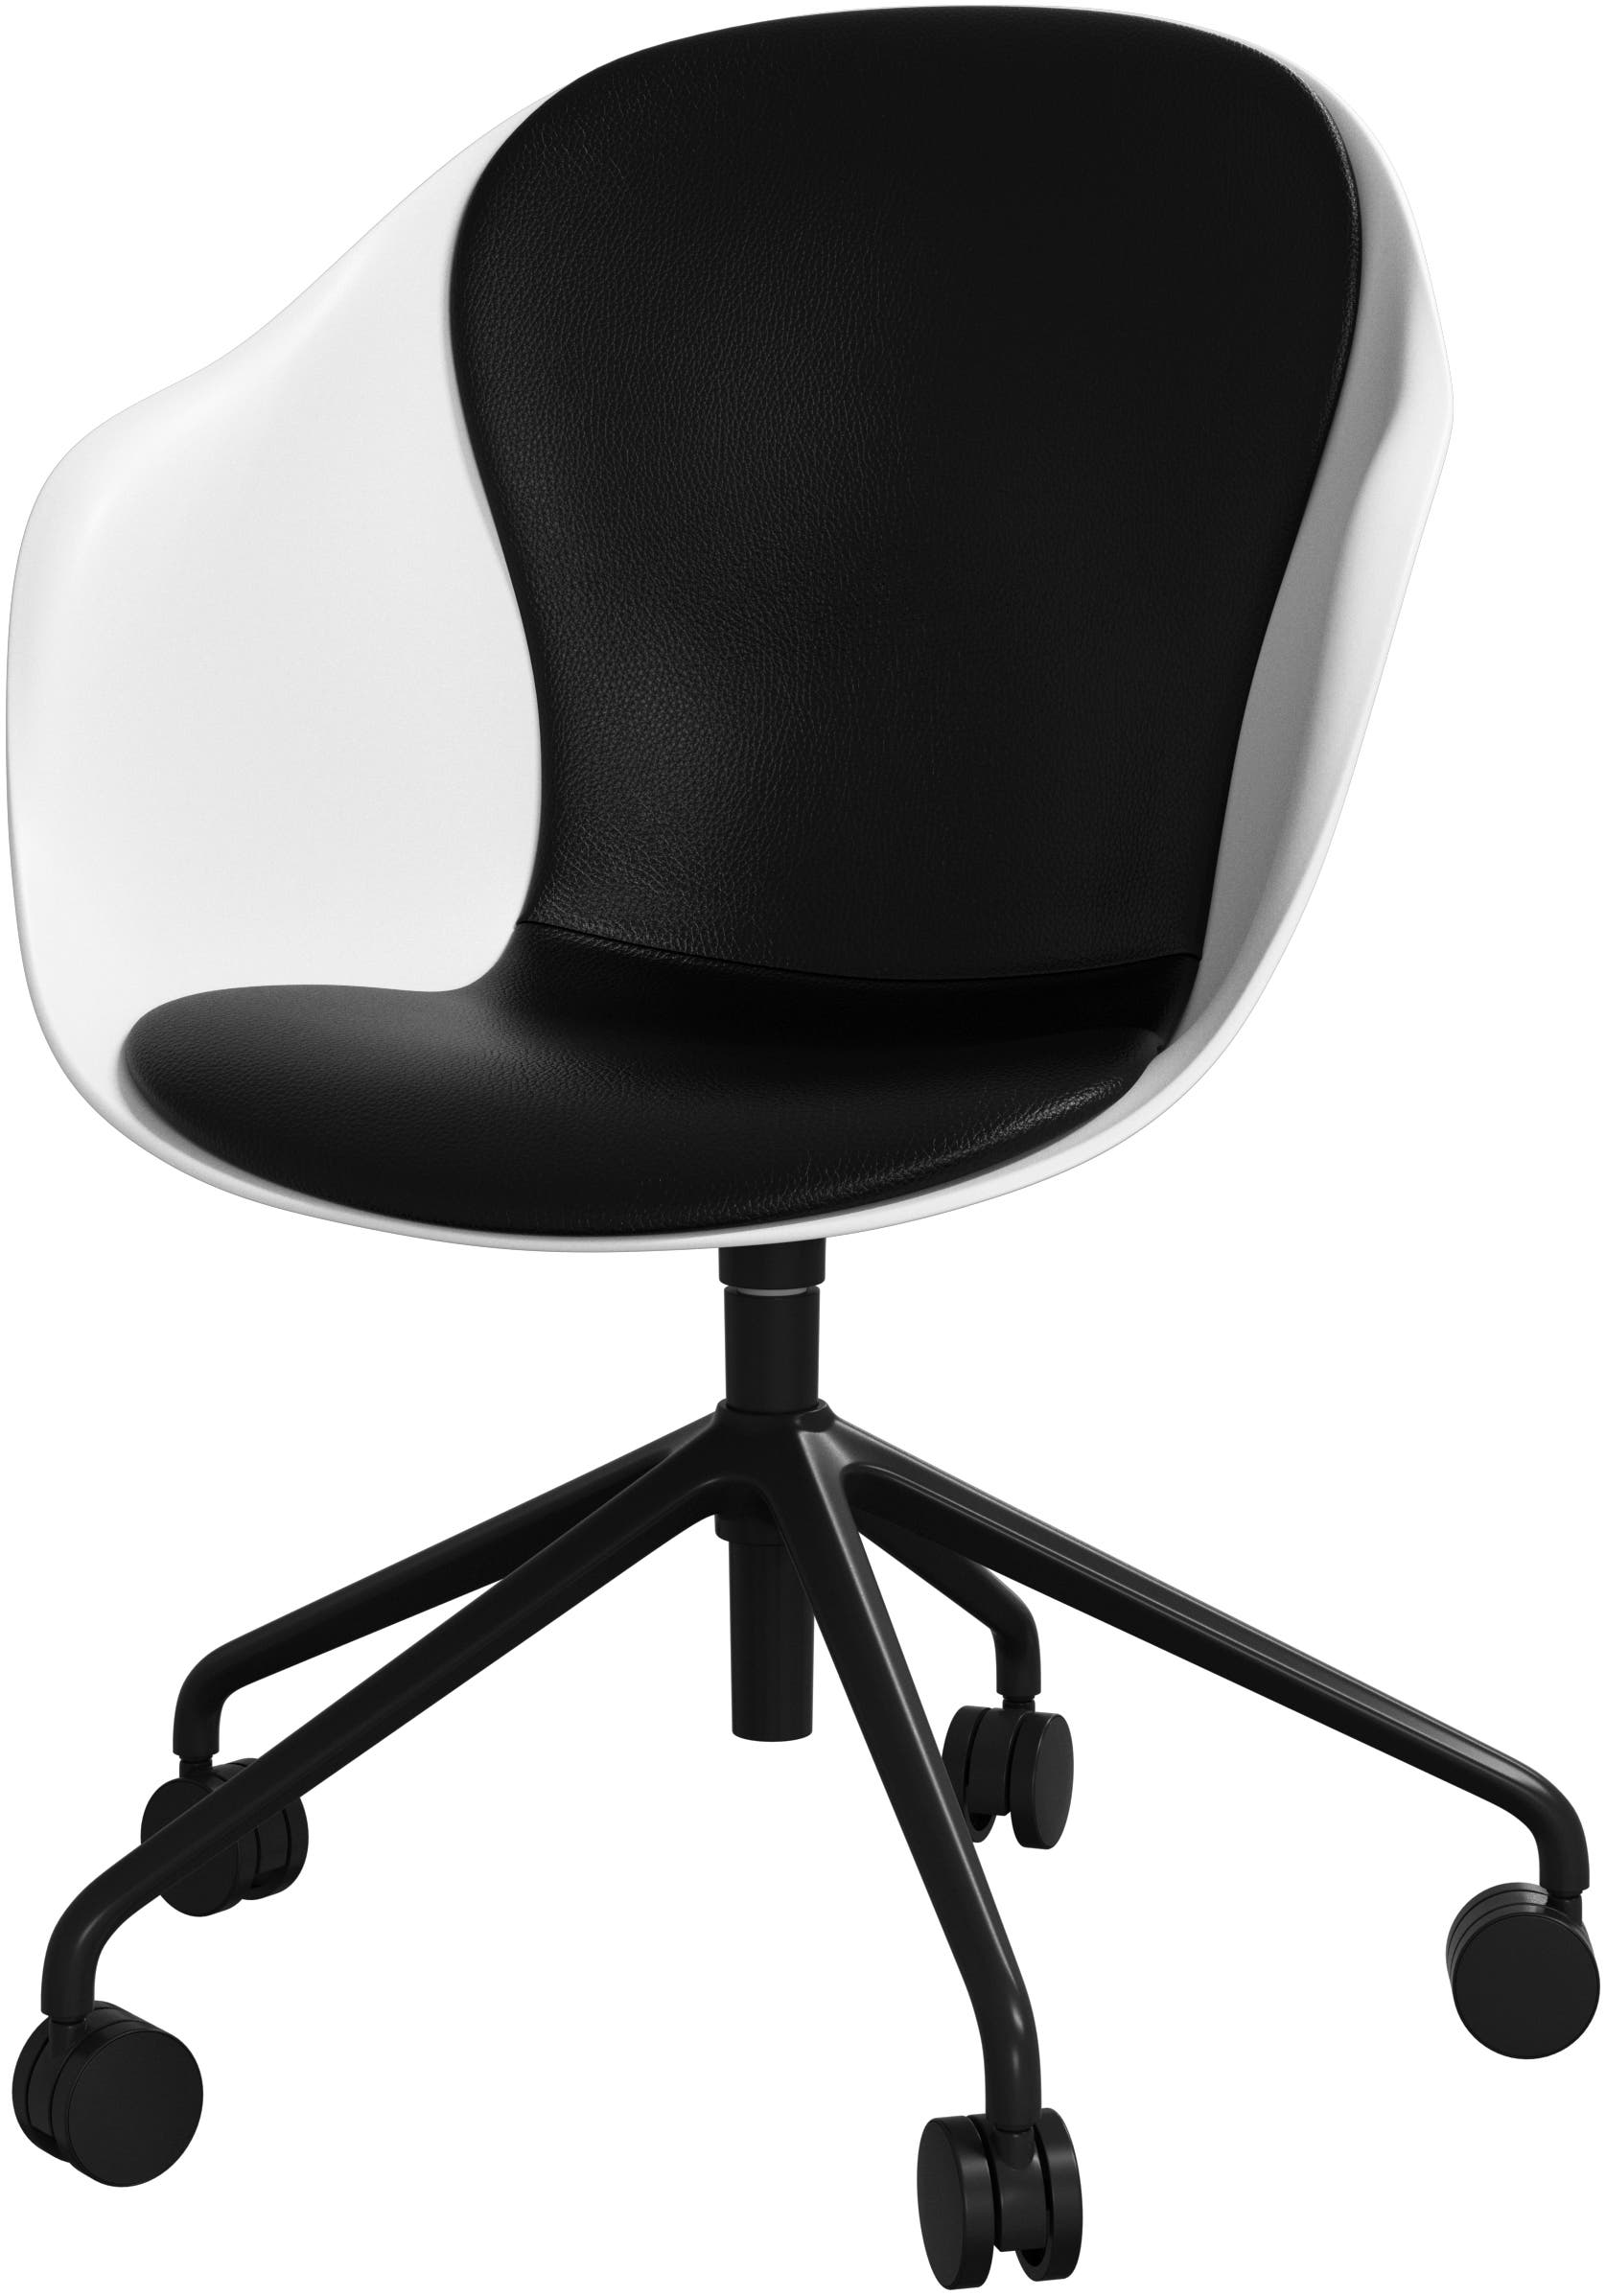 Adelaide office chair